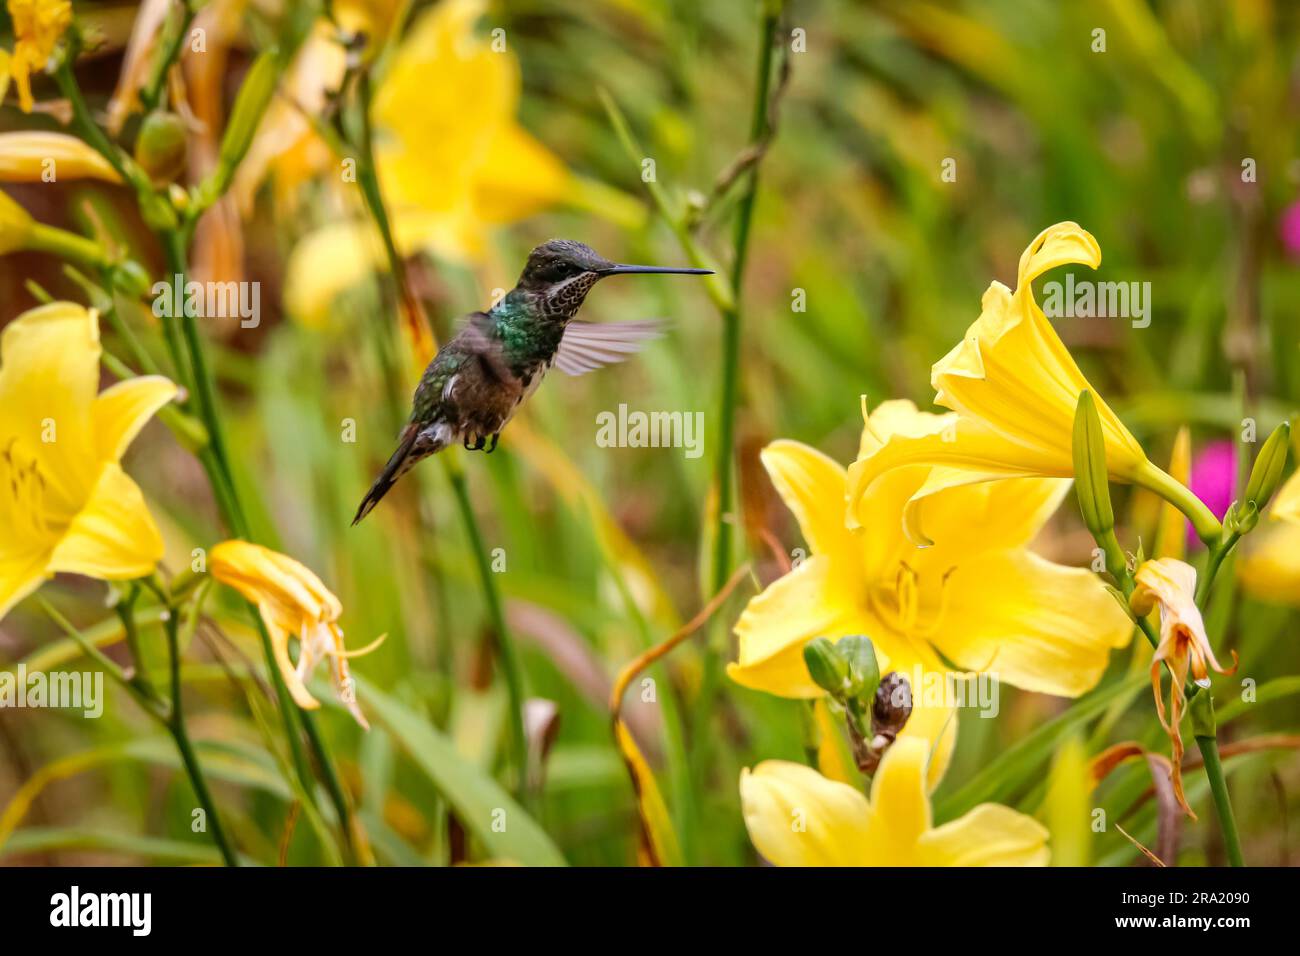 Beautiful small Stripe-breasted star throat hummingbird in flight to a yellow flower to suck nectar, against green defocused background, Caraca natura Stock Photo